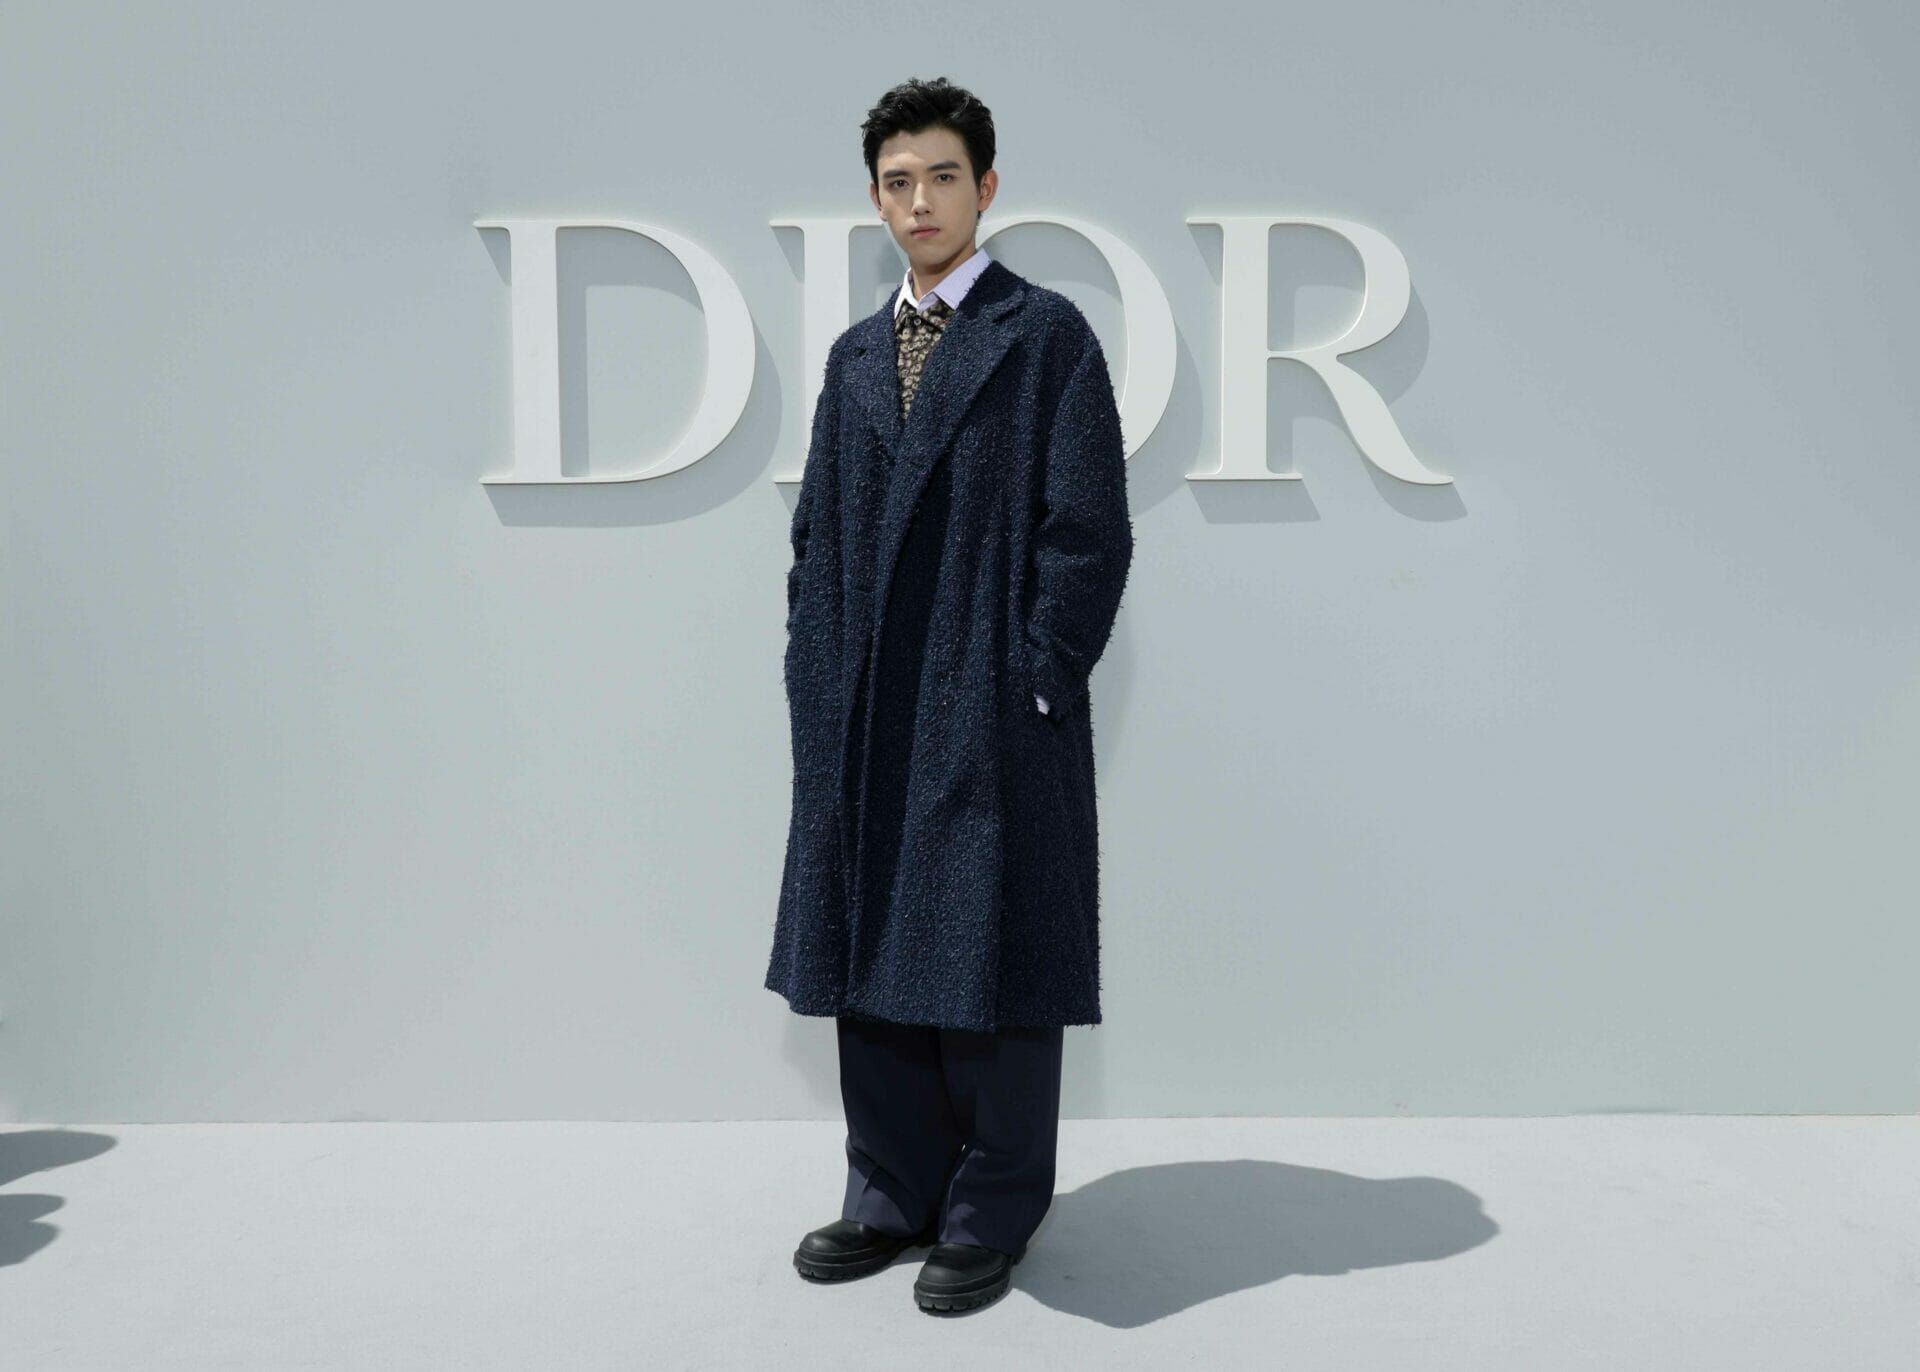 Arthur Chen - Everything you need to know about the Dior Men's Spring/Summer 2023 Show.